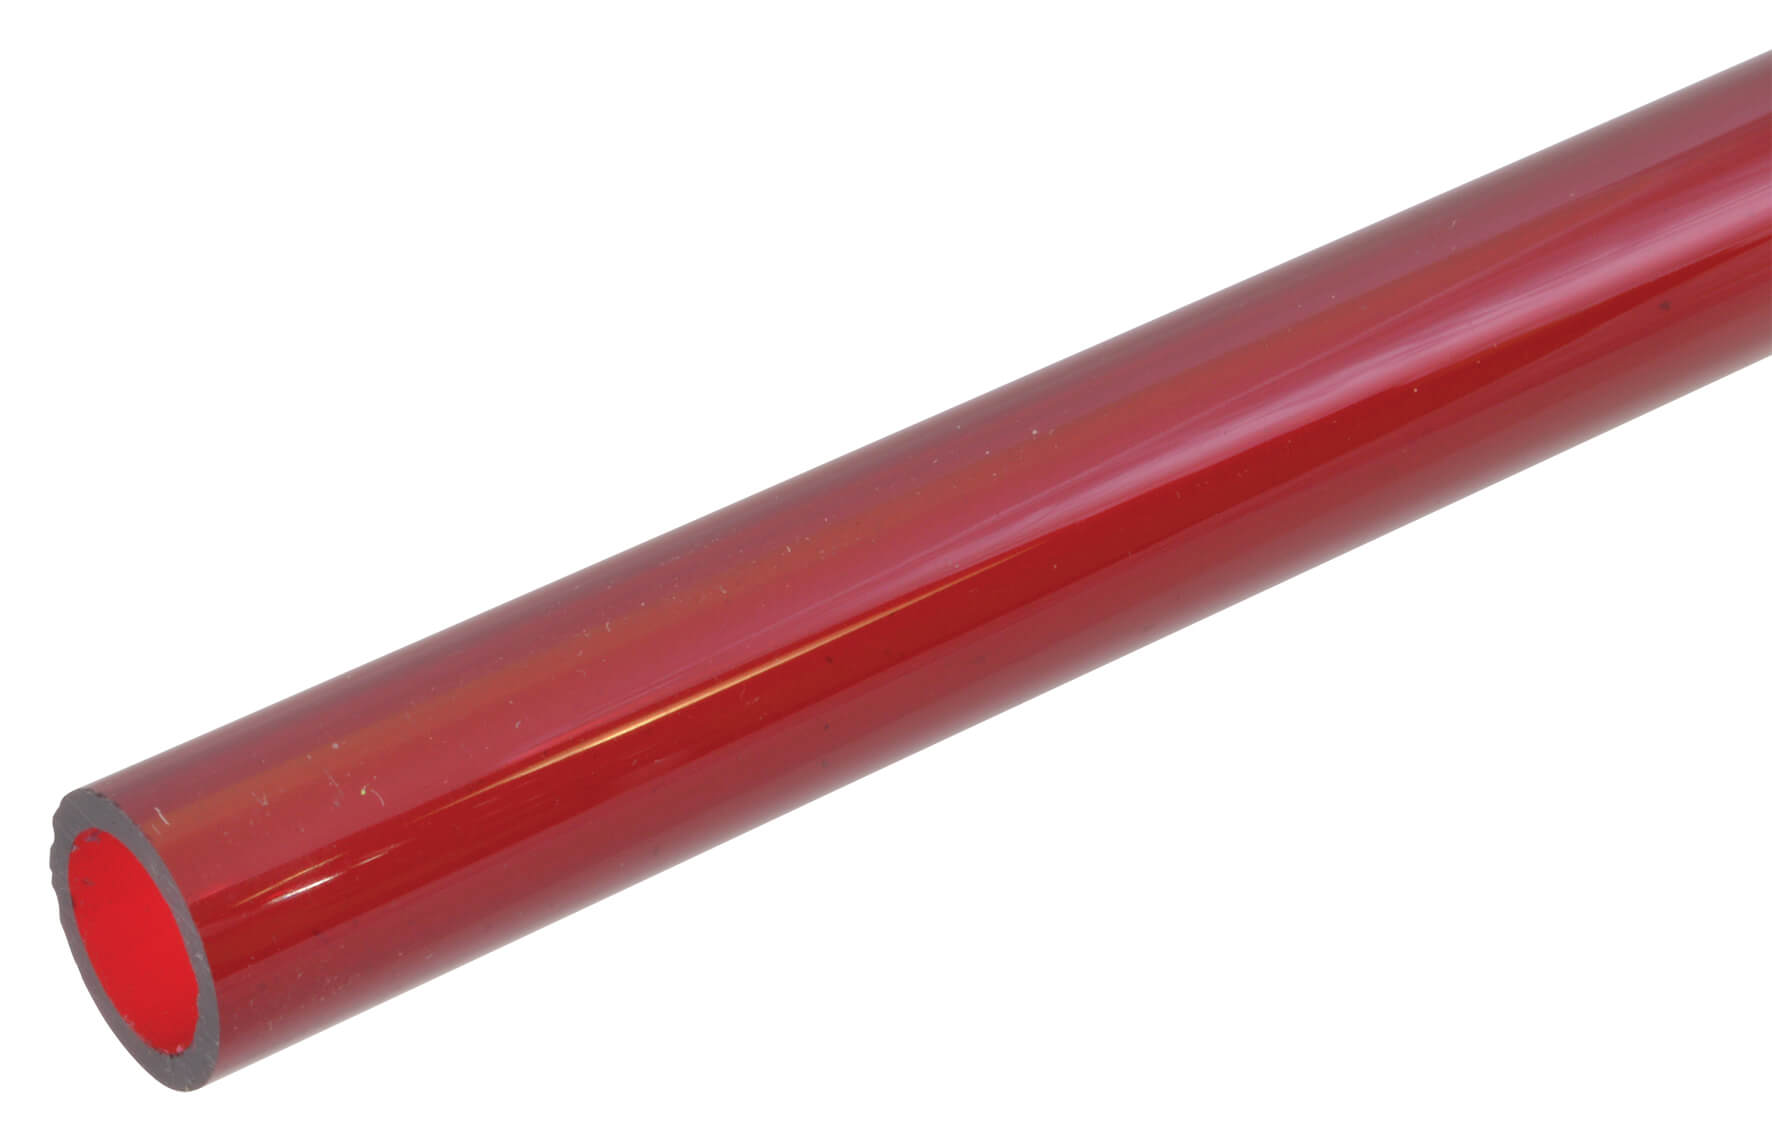 Transparent Acrylic Tube 12.7/9.5mm x 610mm - Red